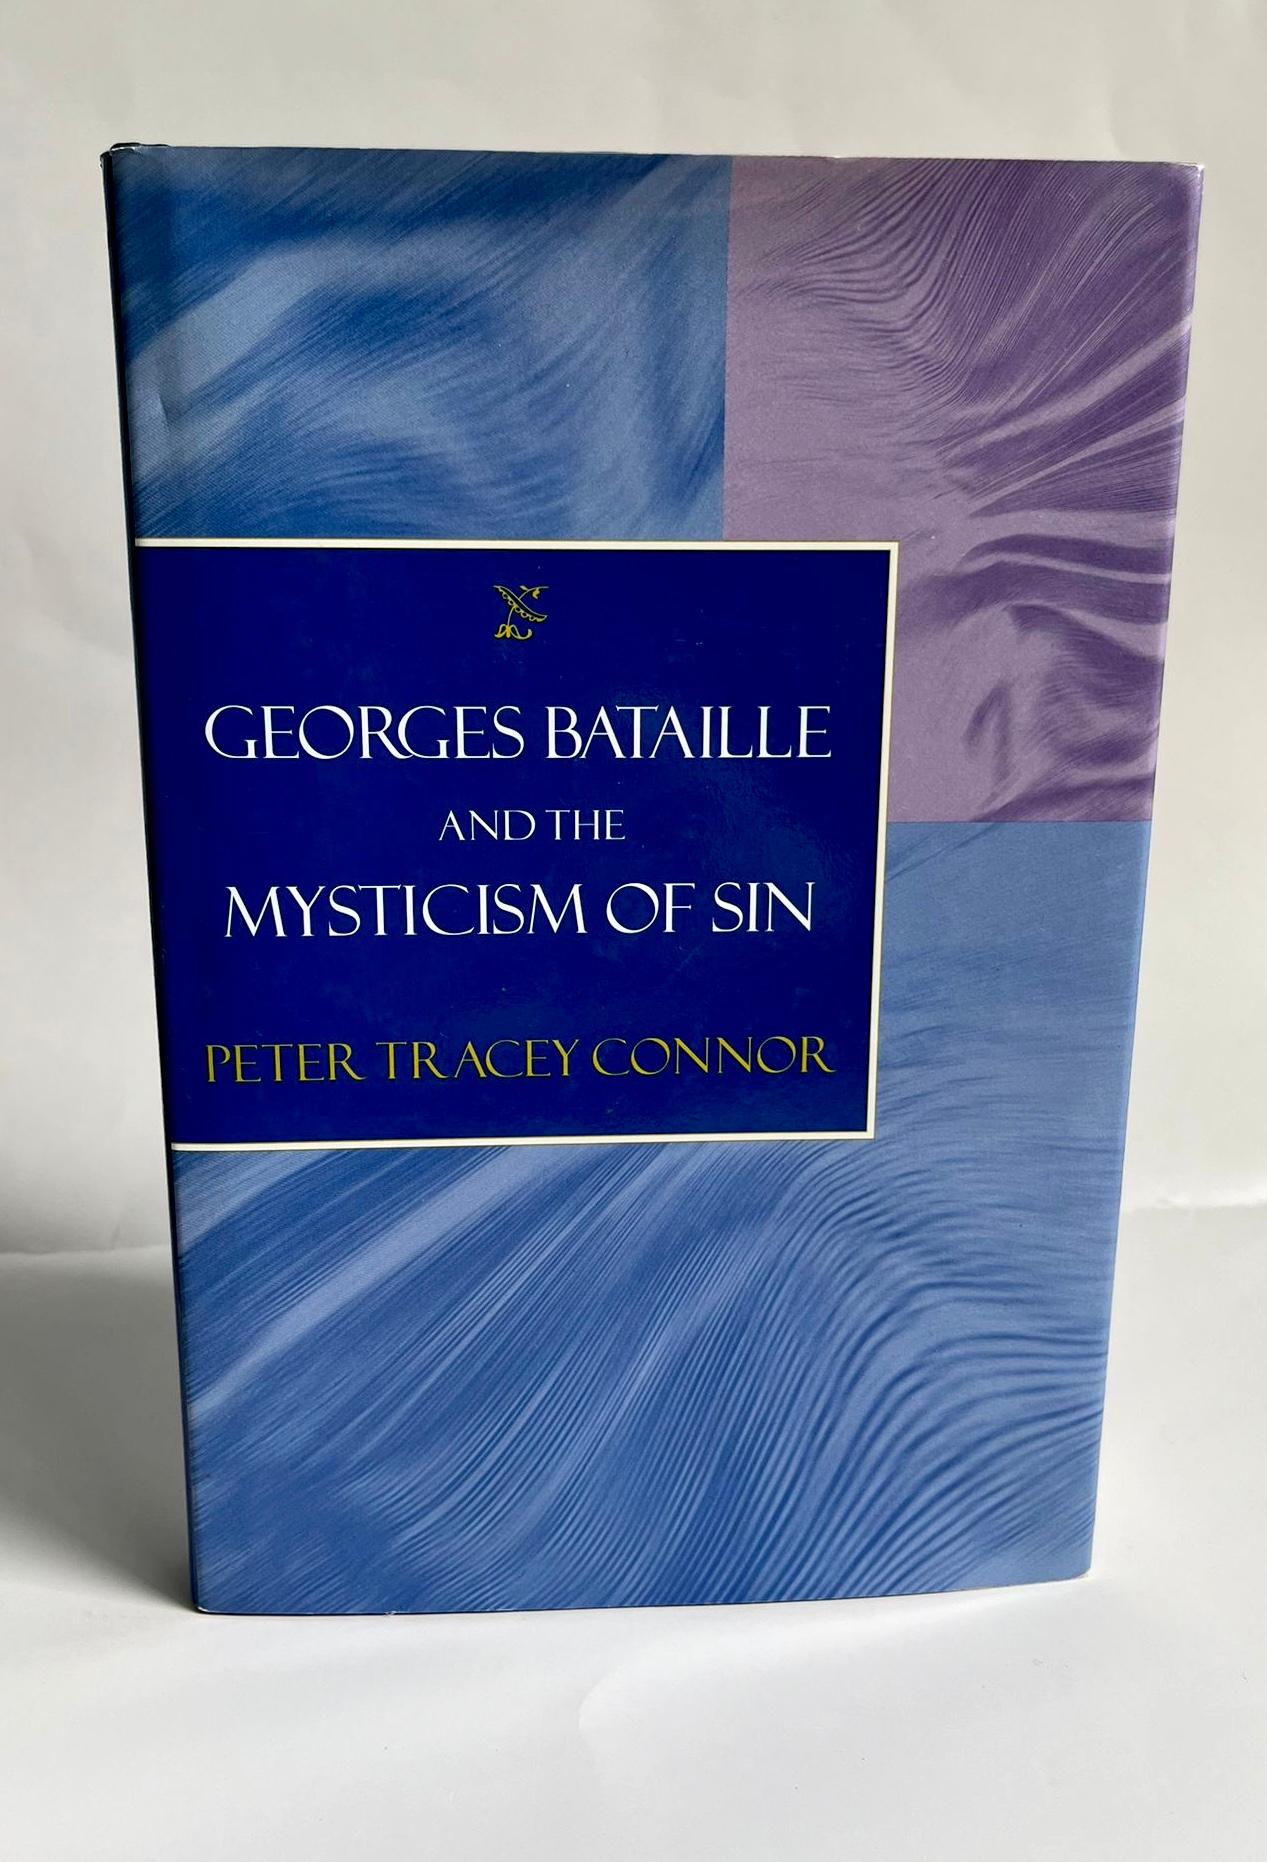 Georges Bataille And The Mysticism of Sin by Peter Tracy Connor